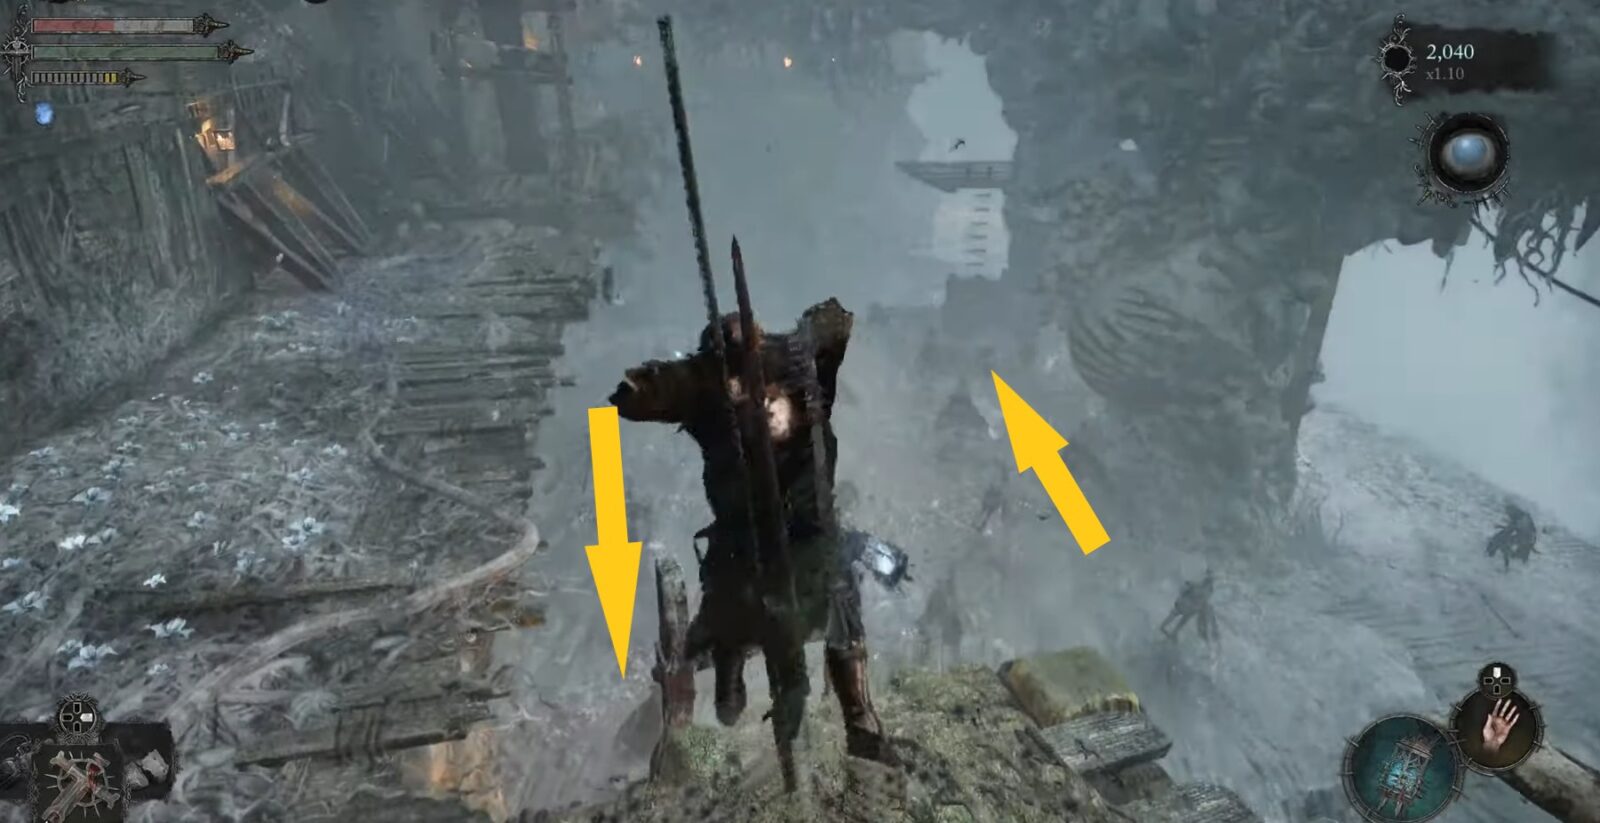 Climb down and then climb up using ladder as shown by arrows